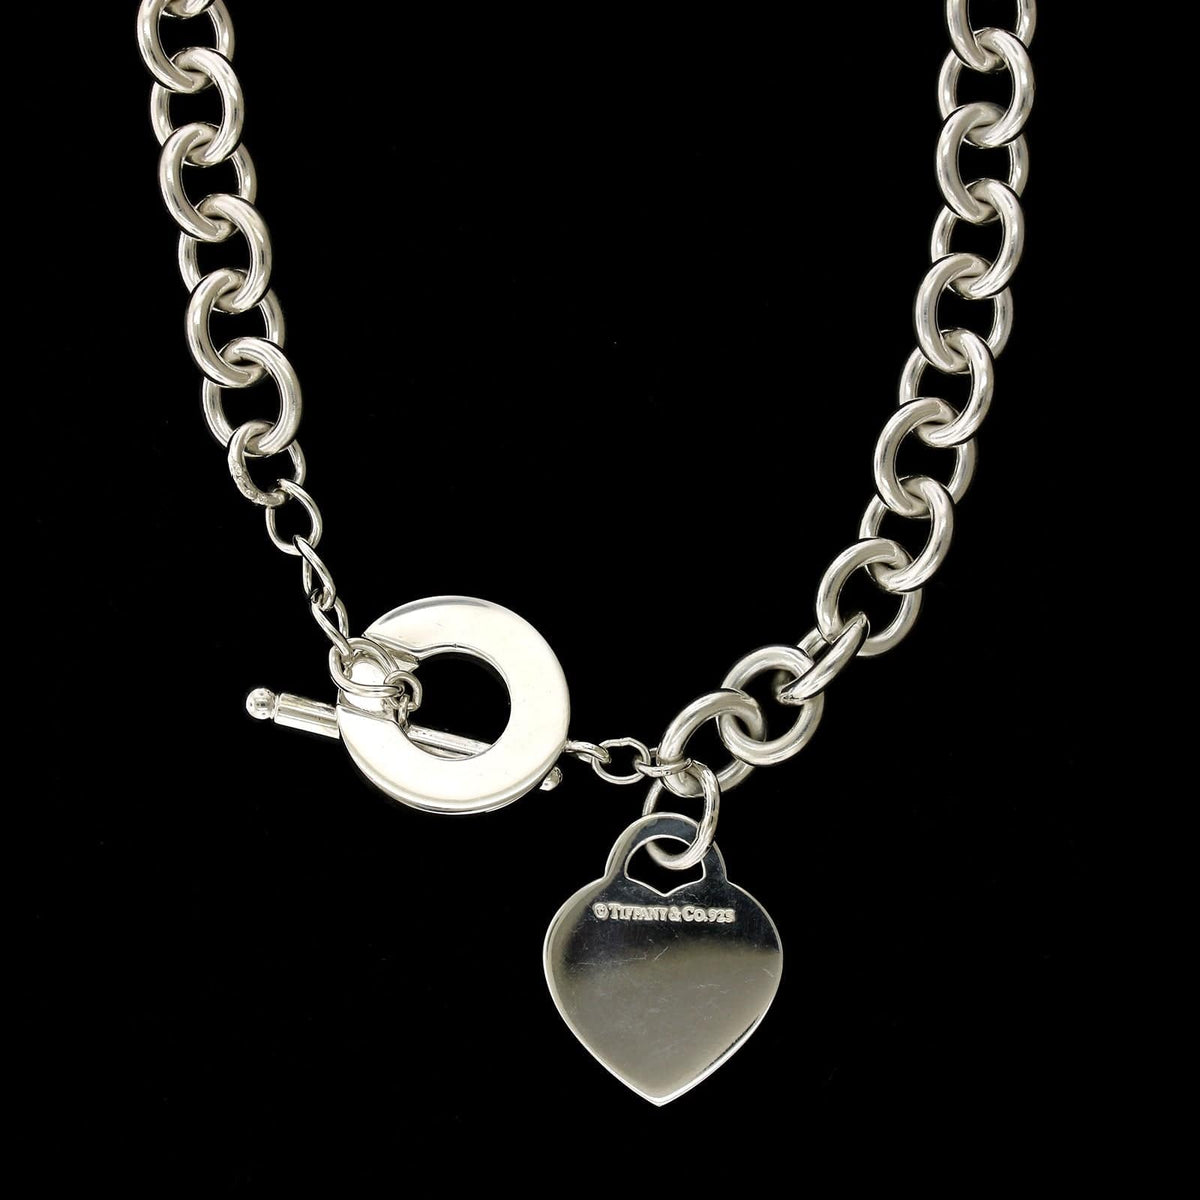 Tiffany Co. Sterling Silver Estate Return to Tiffany Heart Tag Toggle Necklacesterling silver back